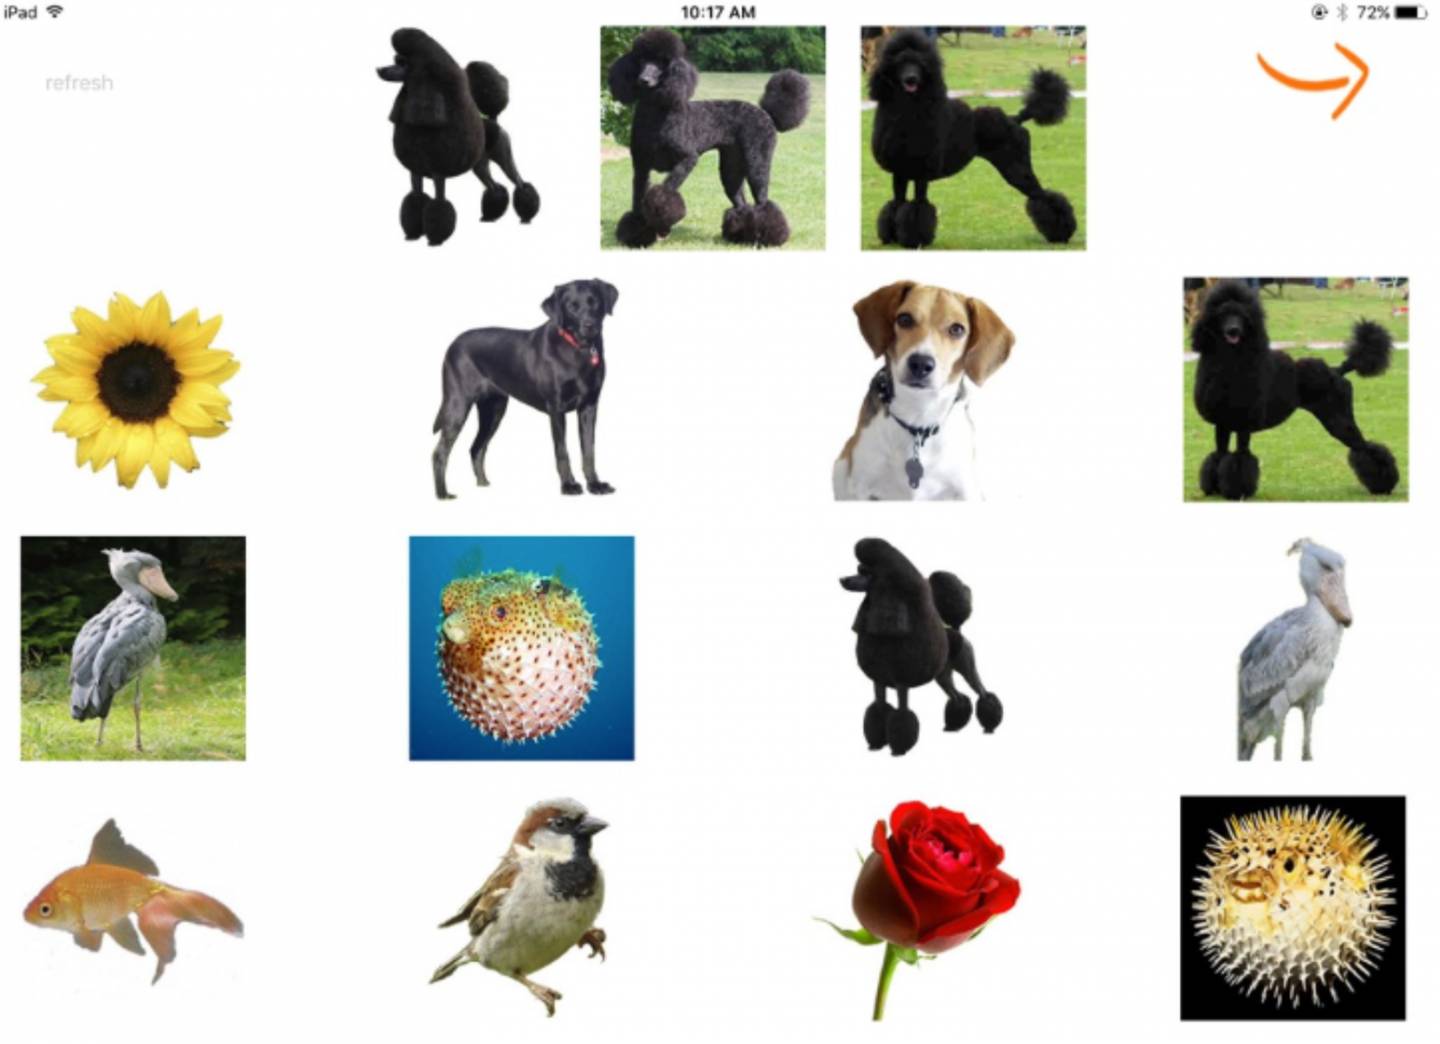 Images of dogs and various other animals and plants